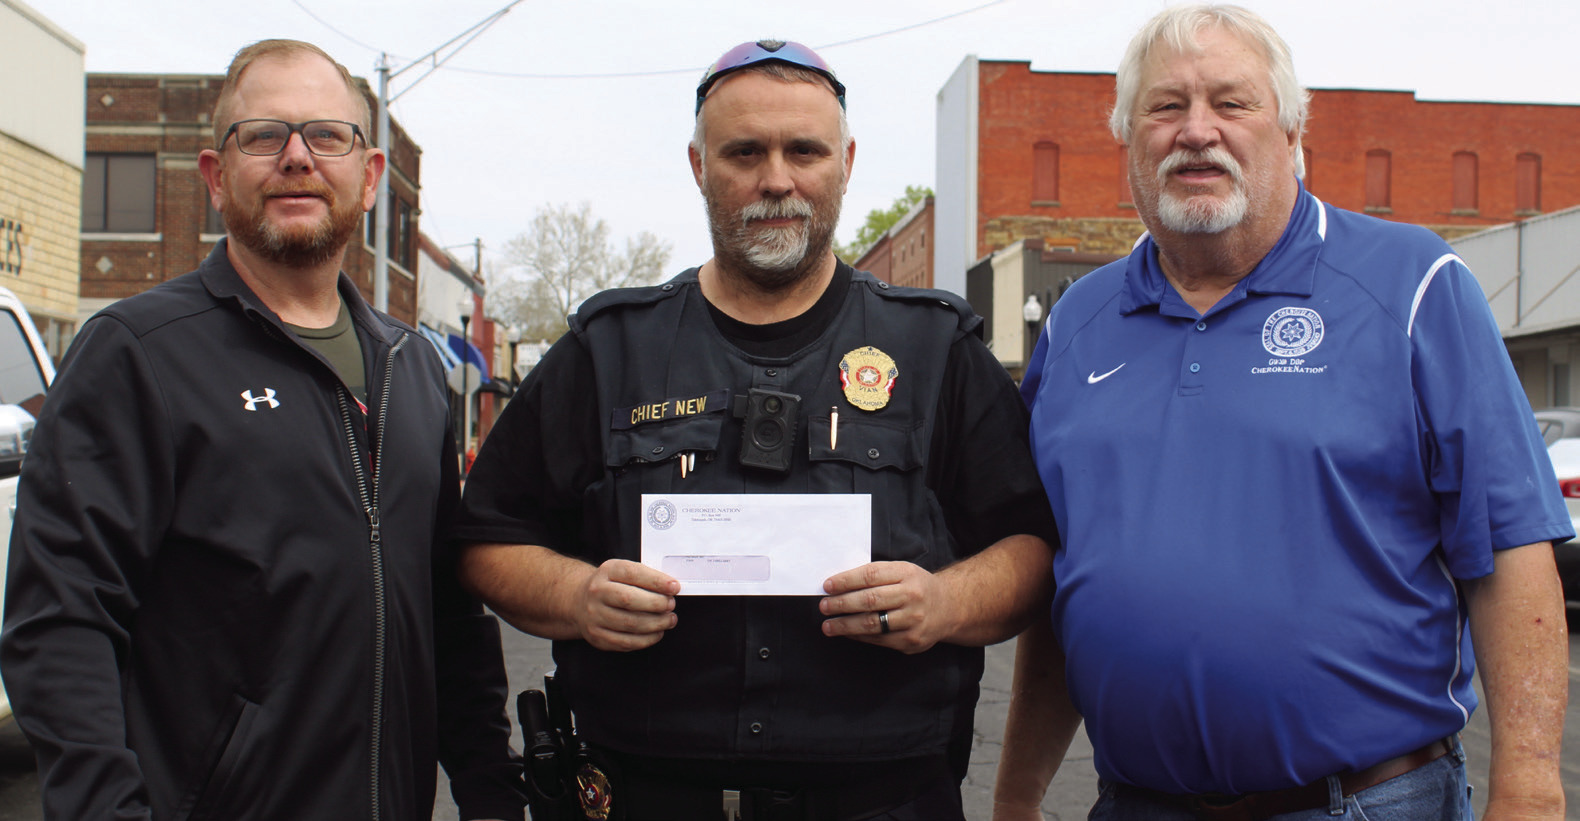 Vian Police Chief Daniel New (center) pictured with Cherokee Nation Councilman Daryl Legg (left), and E.O. Smith Jr. (right).